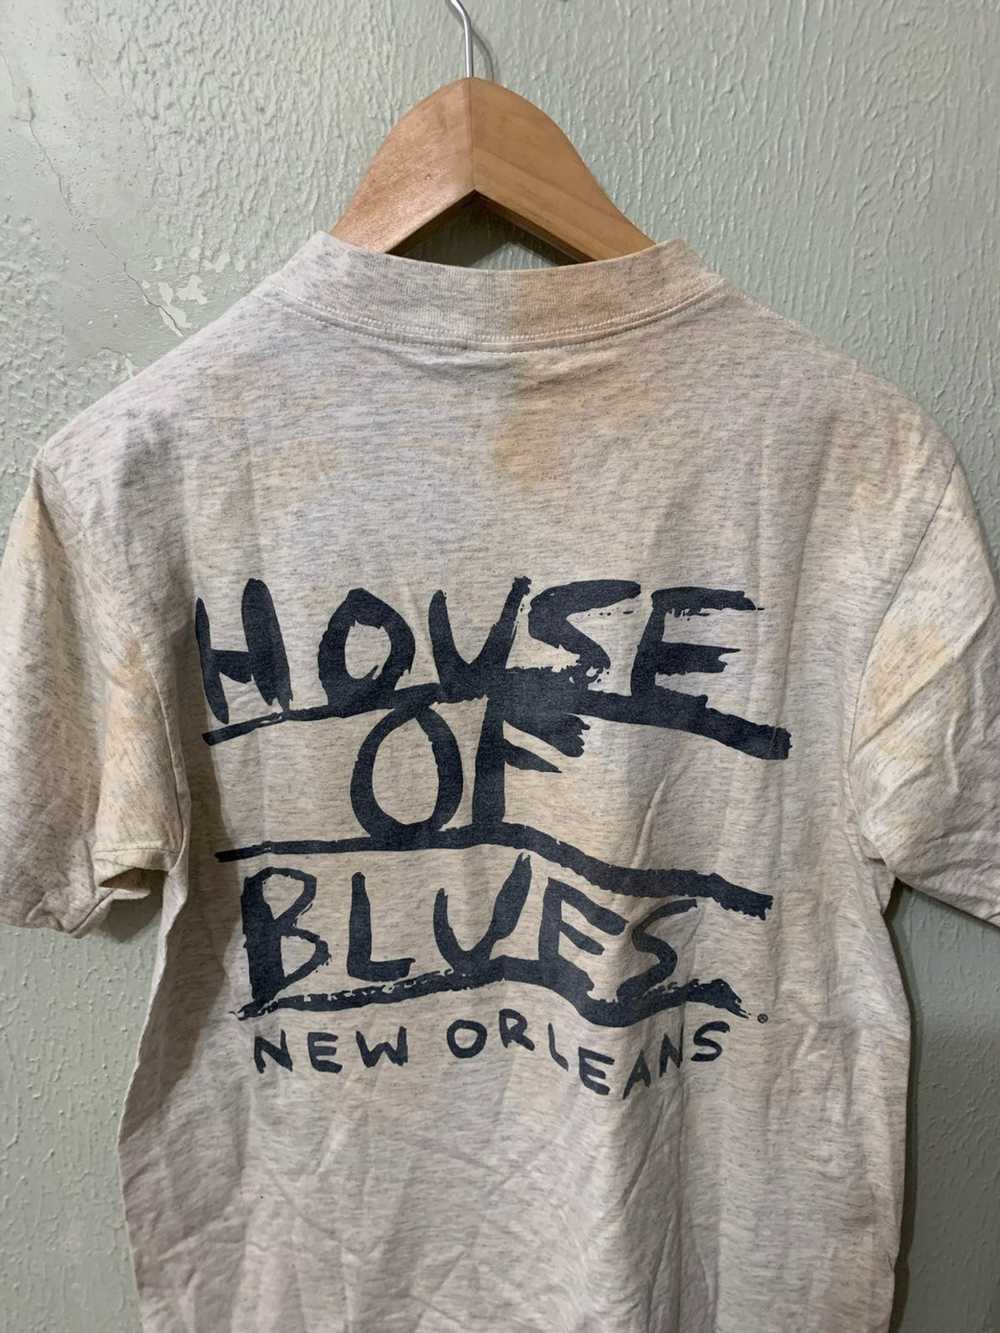 Vintage Vintage House of Blues Grey Stained Tee - image 2